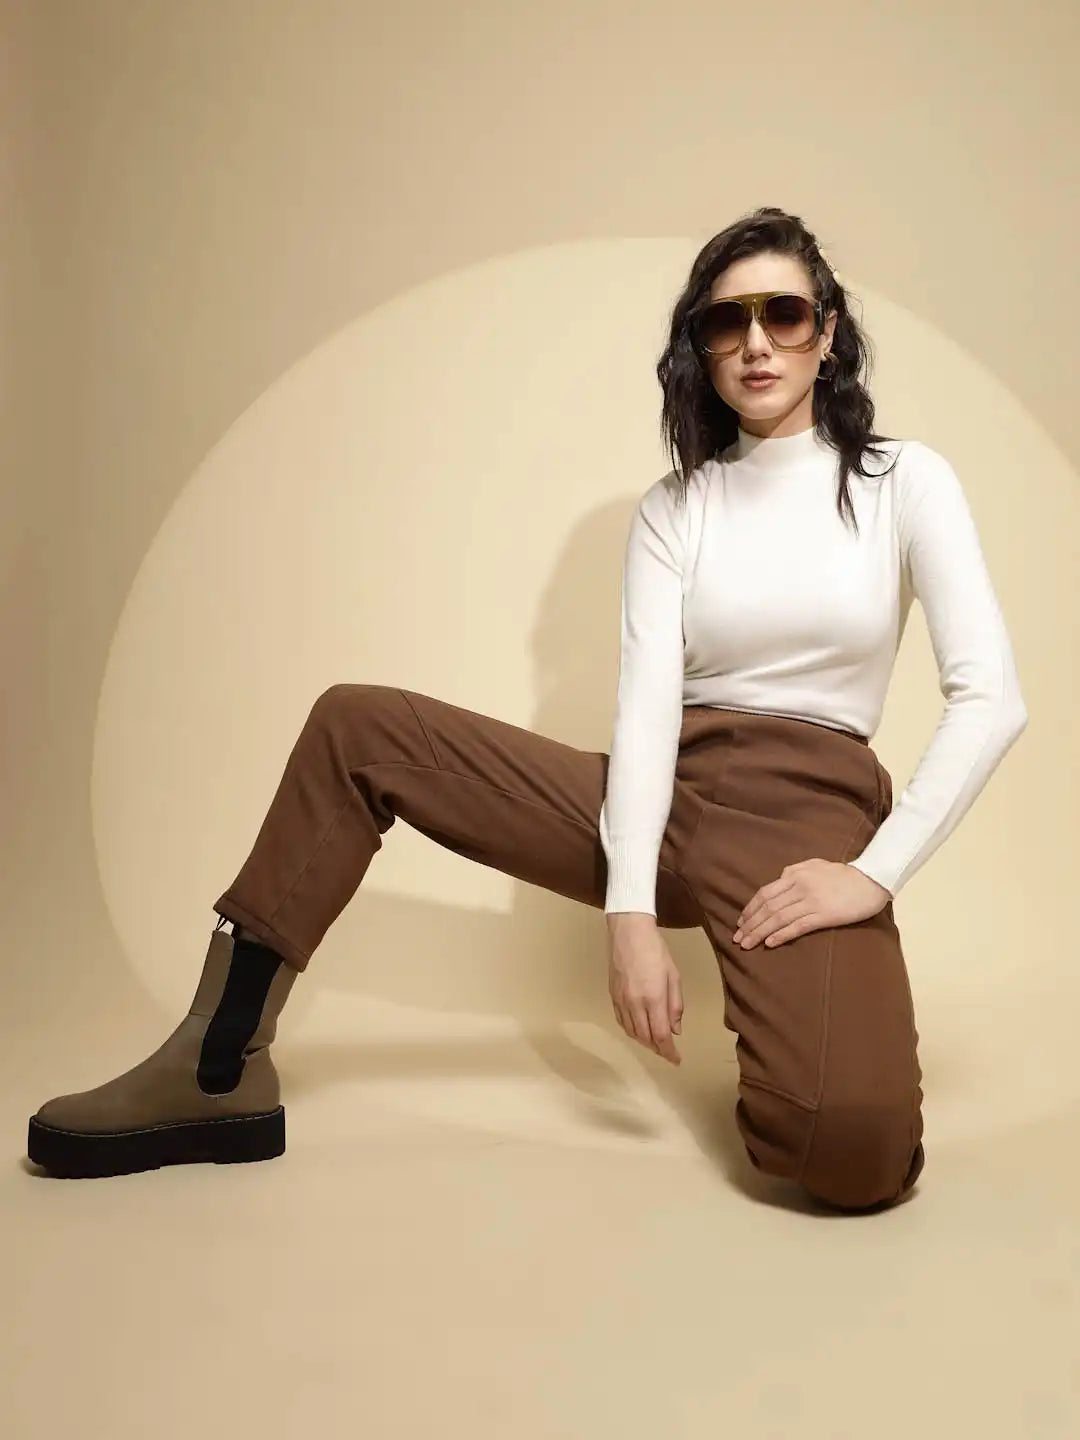 Brown Solid Cotton Mid Rise Ankle Length Trouser